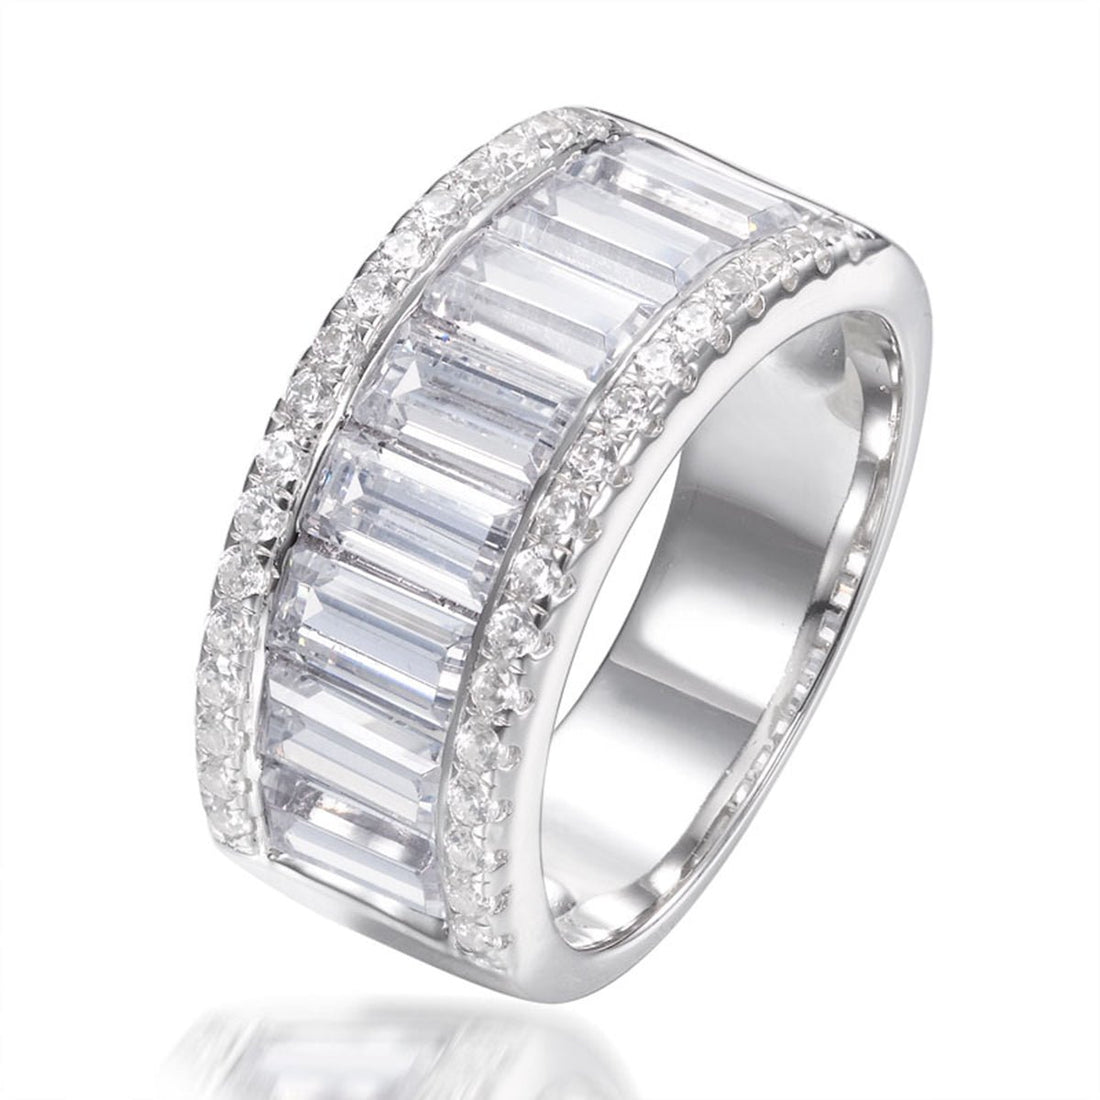 5.60ct Cubic Zirconia Baguette Cut Half Eternity Ring Set in Rhodium Plated Silver